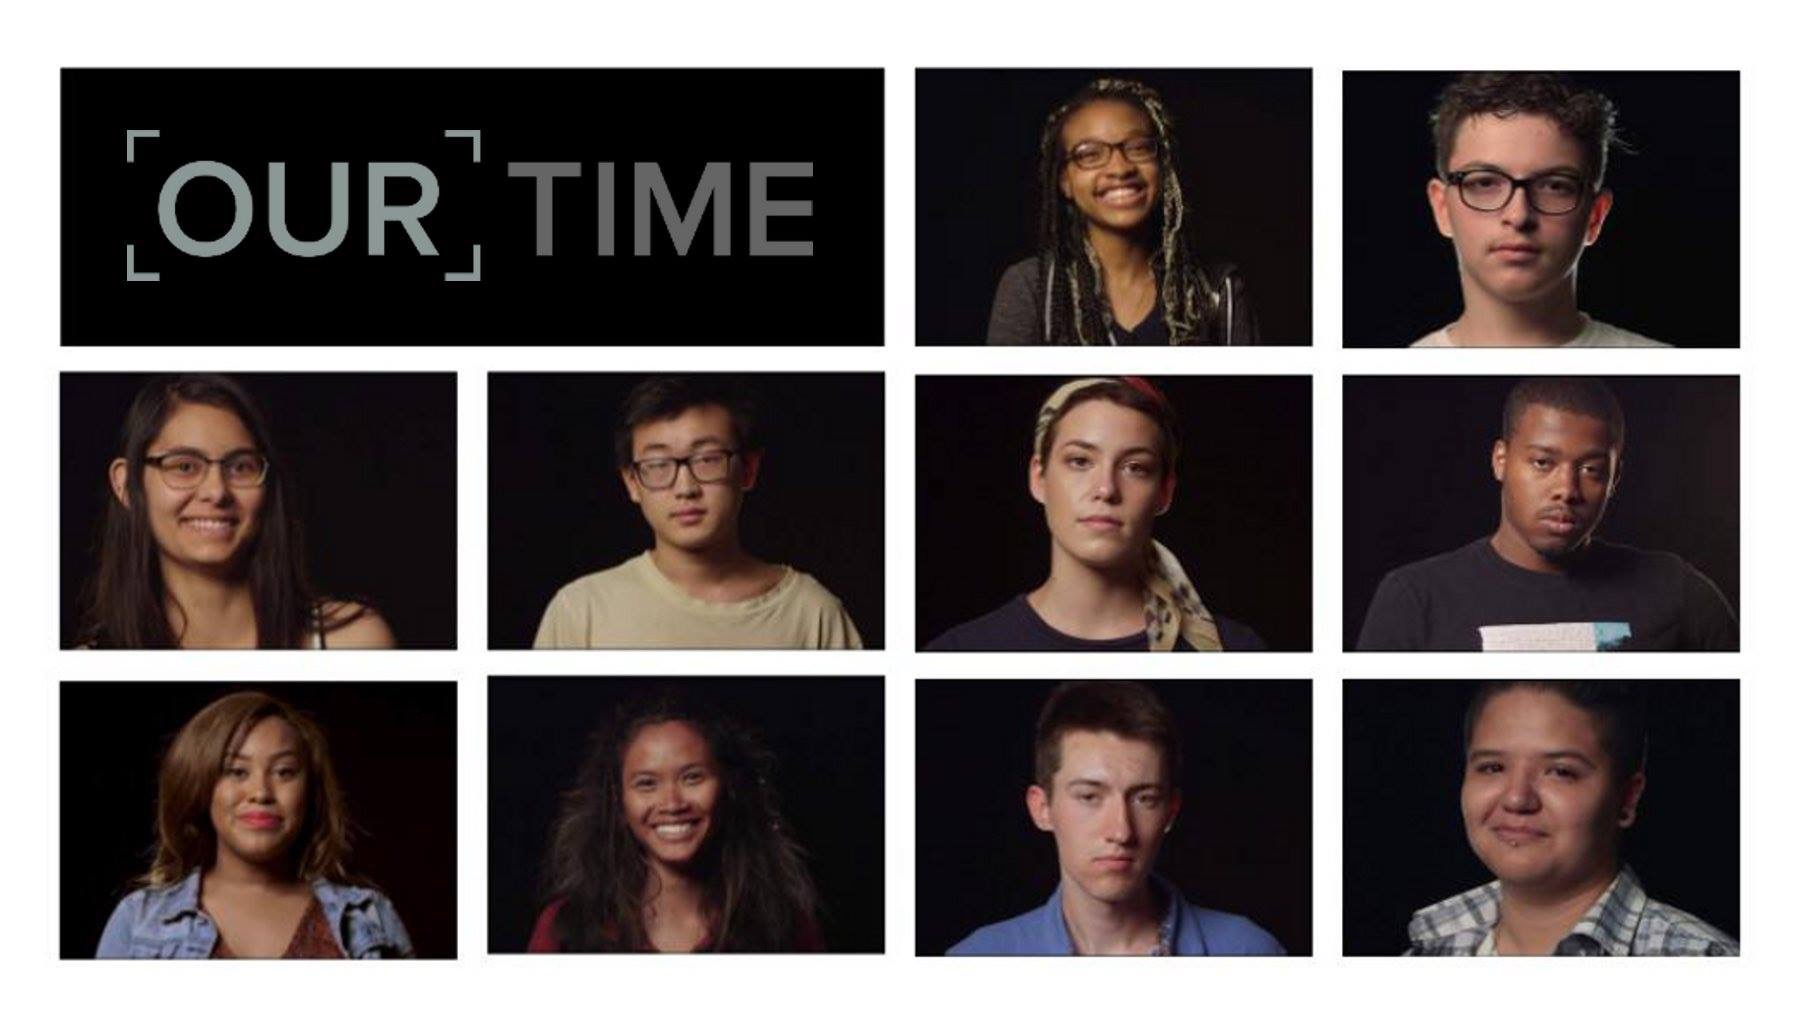 OUR TIME premieres Sept 16 on PBS